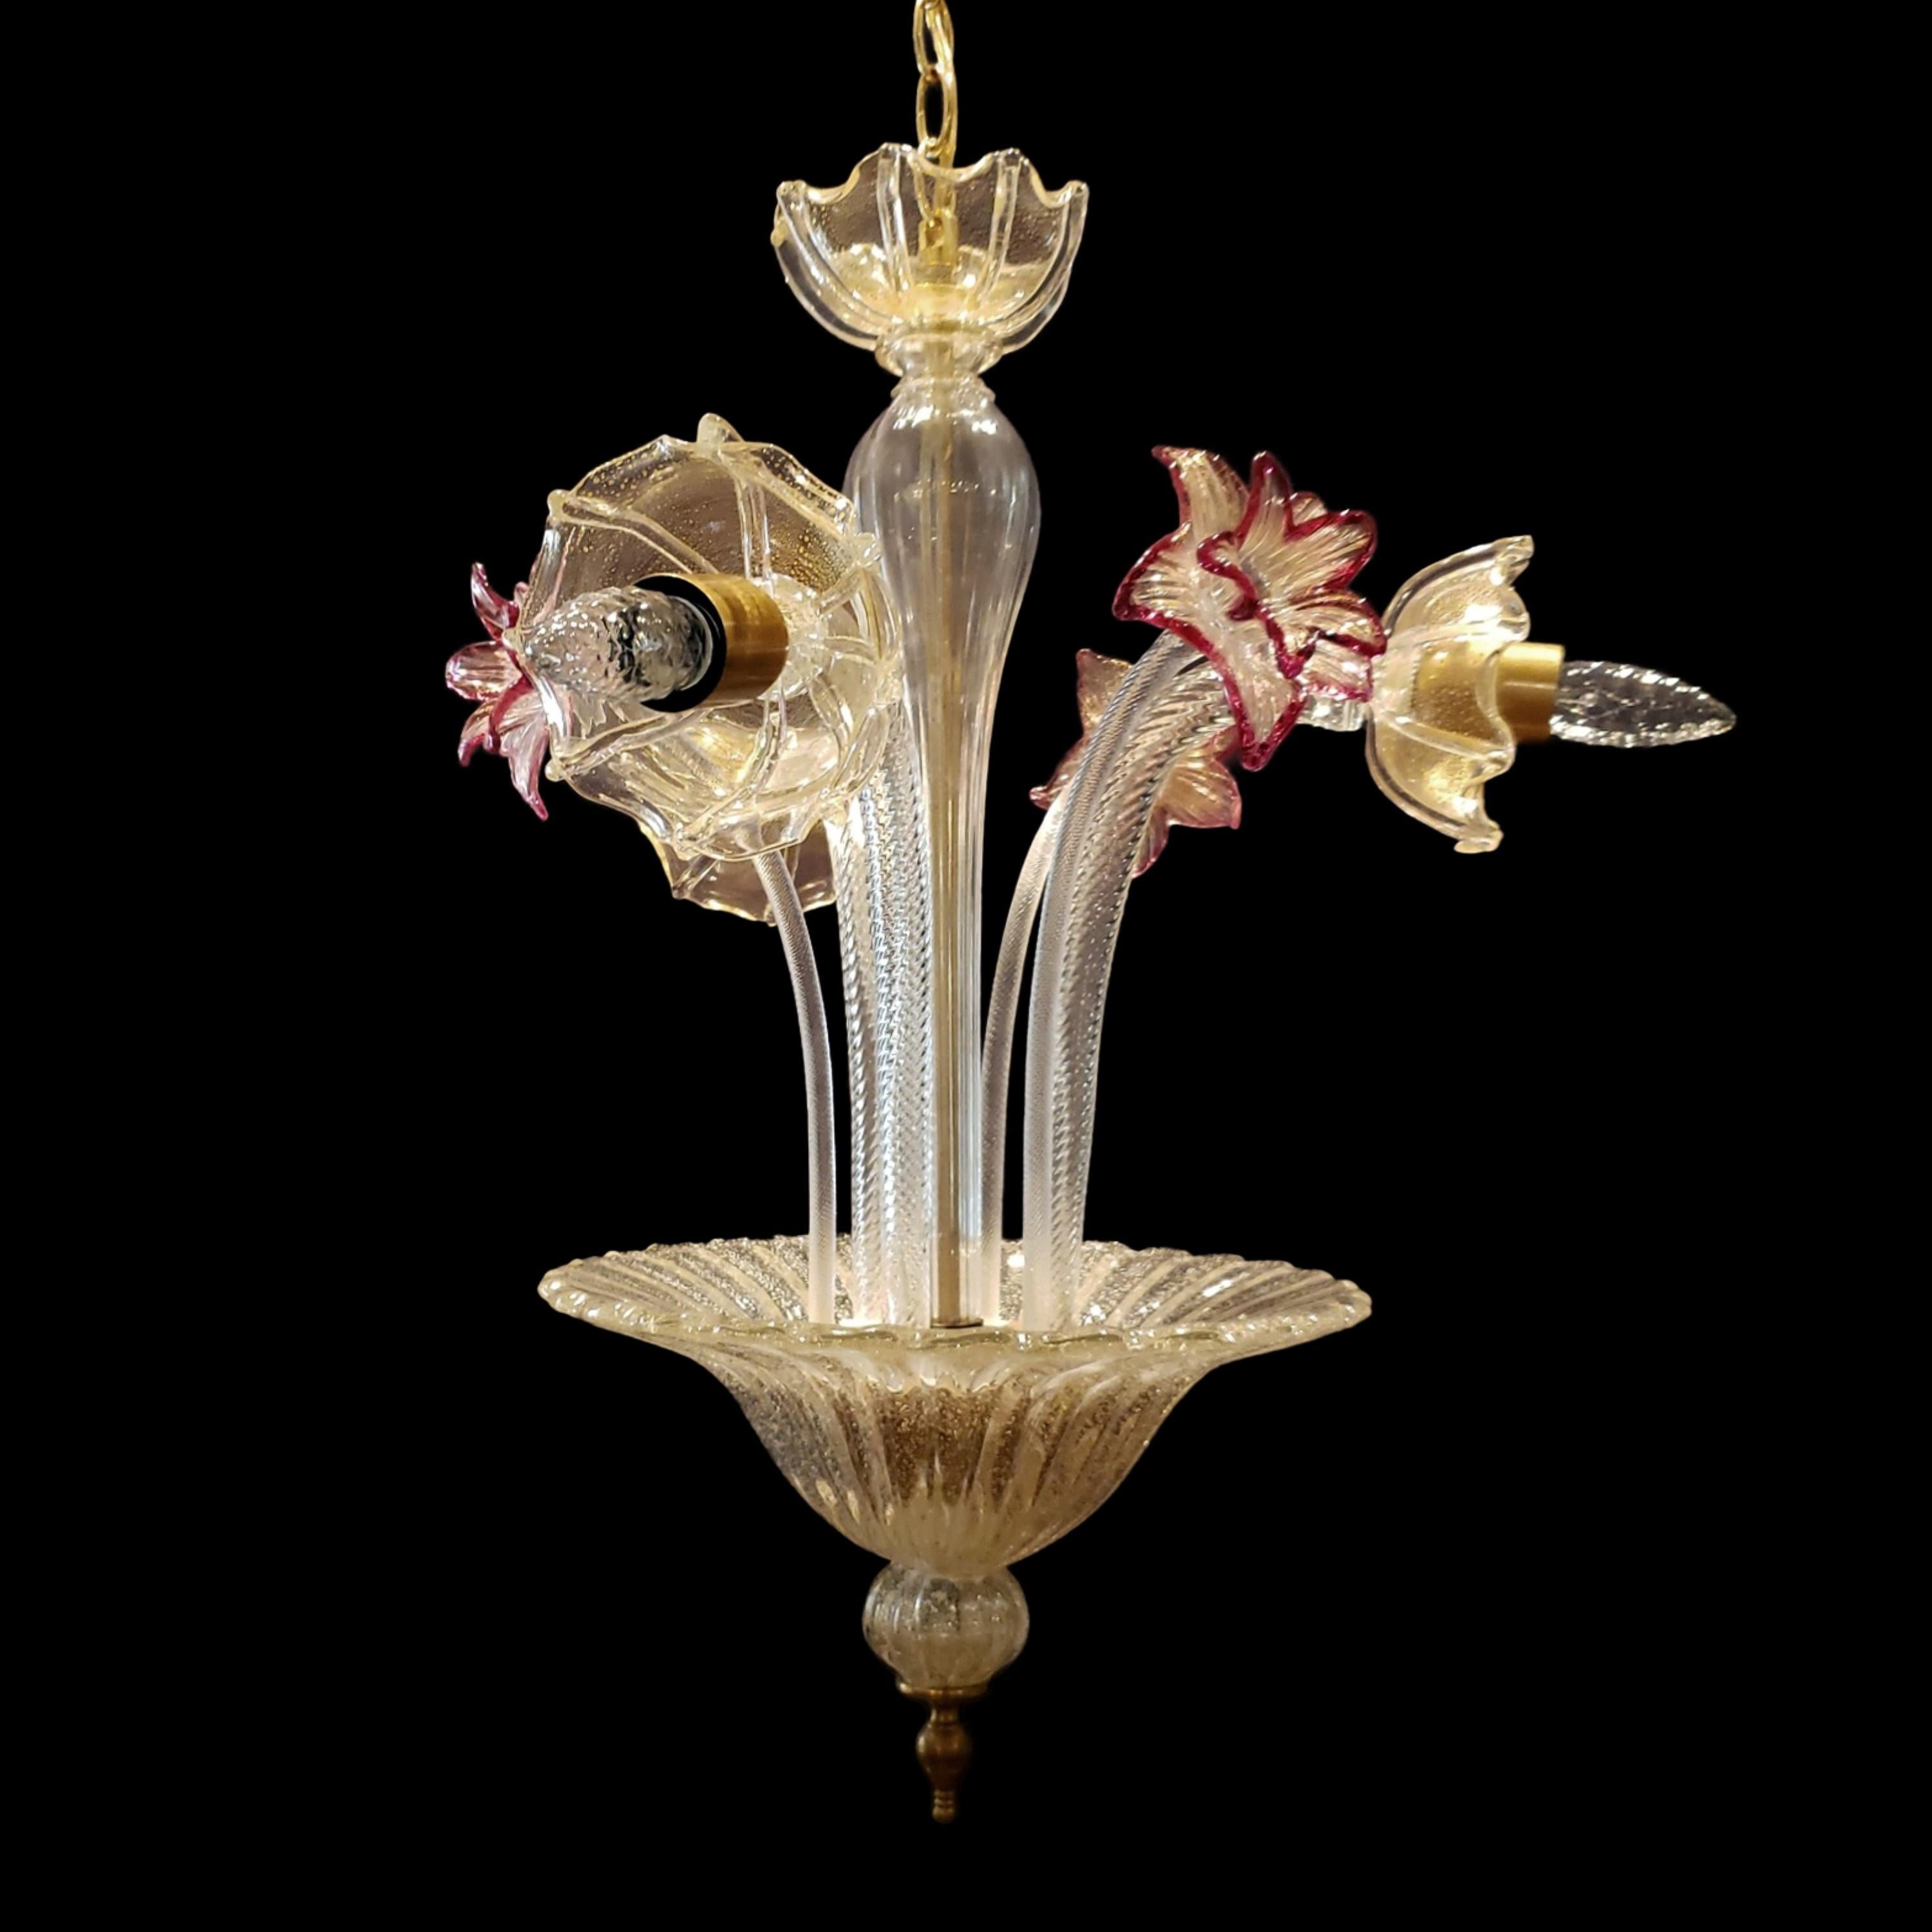 Murano 3 arm crystal chandelier with three up flowers in a gold and deep rose color. This comes rewired and ready to install. Ships disassembled. Cleaned and restored. Please note, this item is located in our Scranton, PA location.